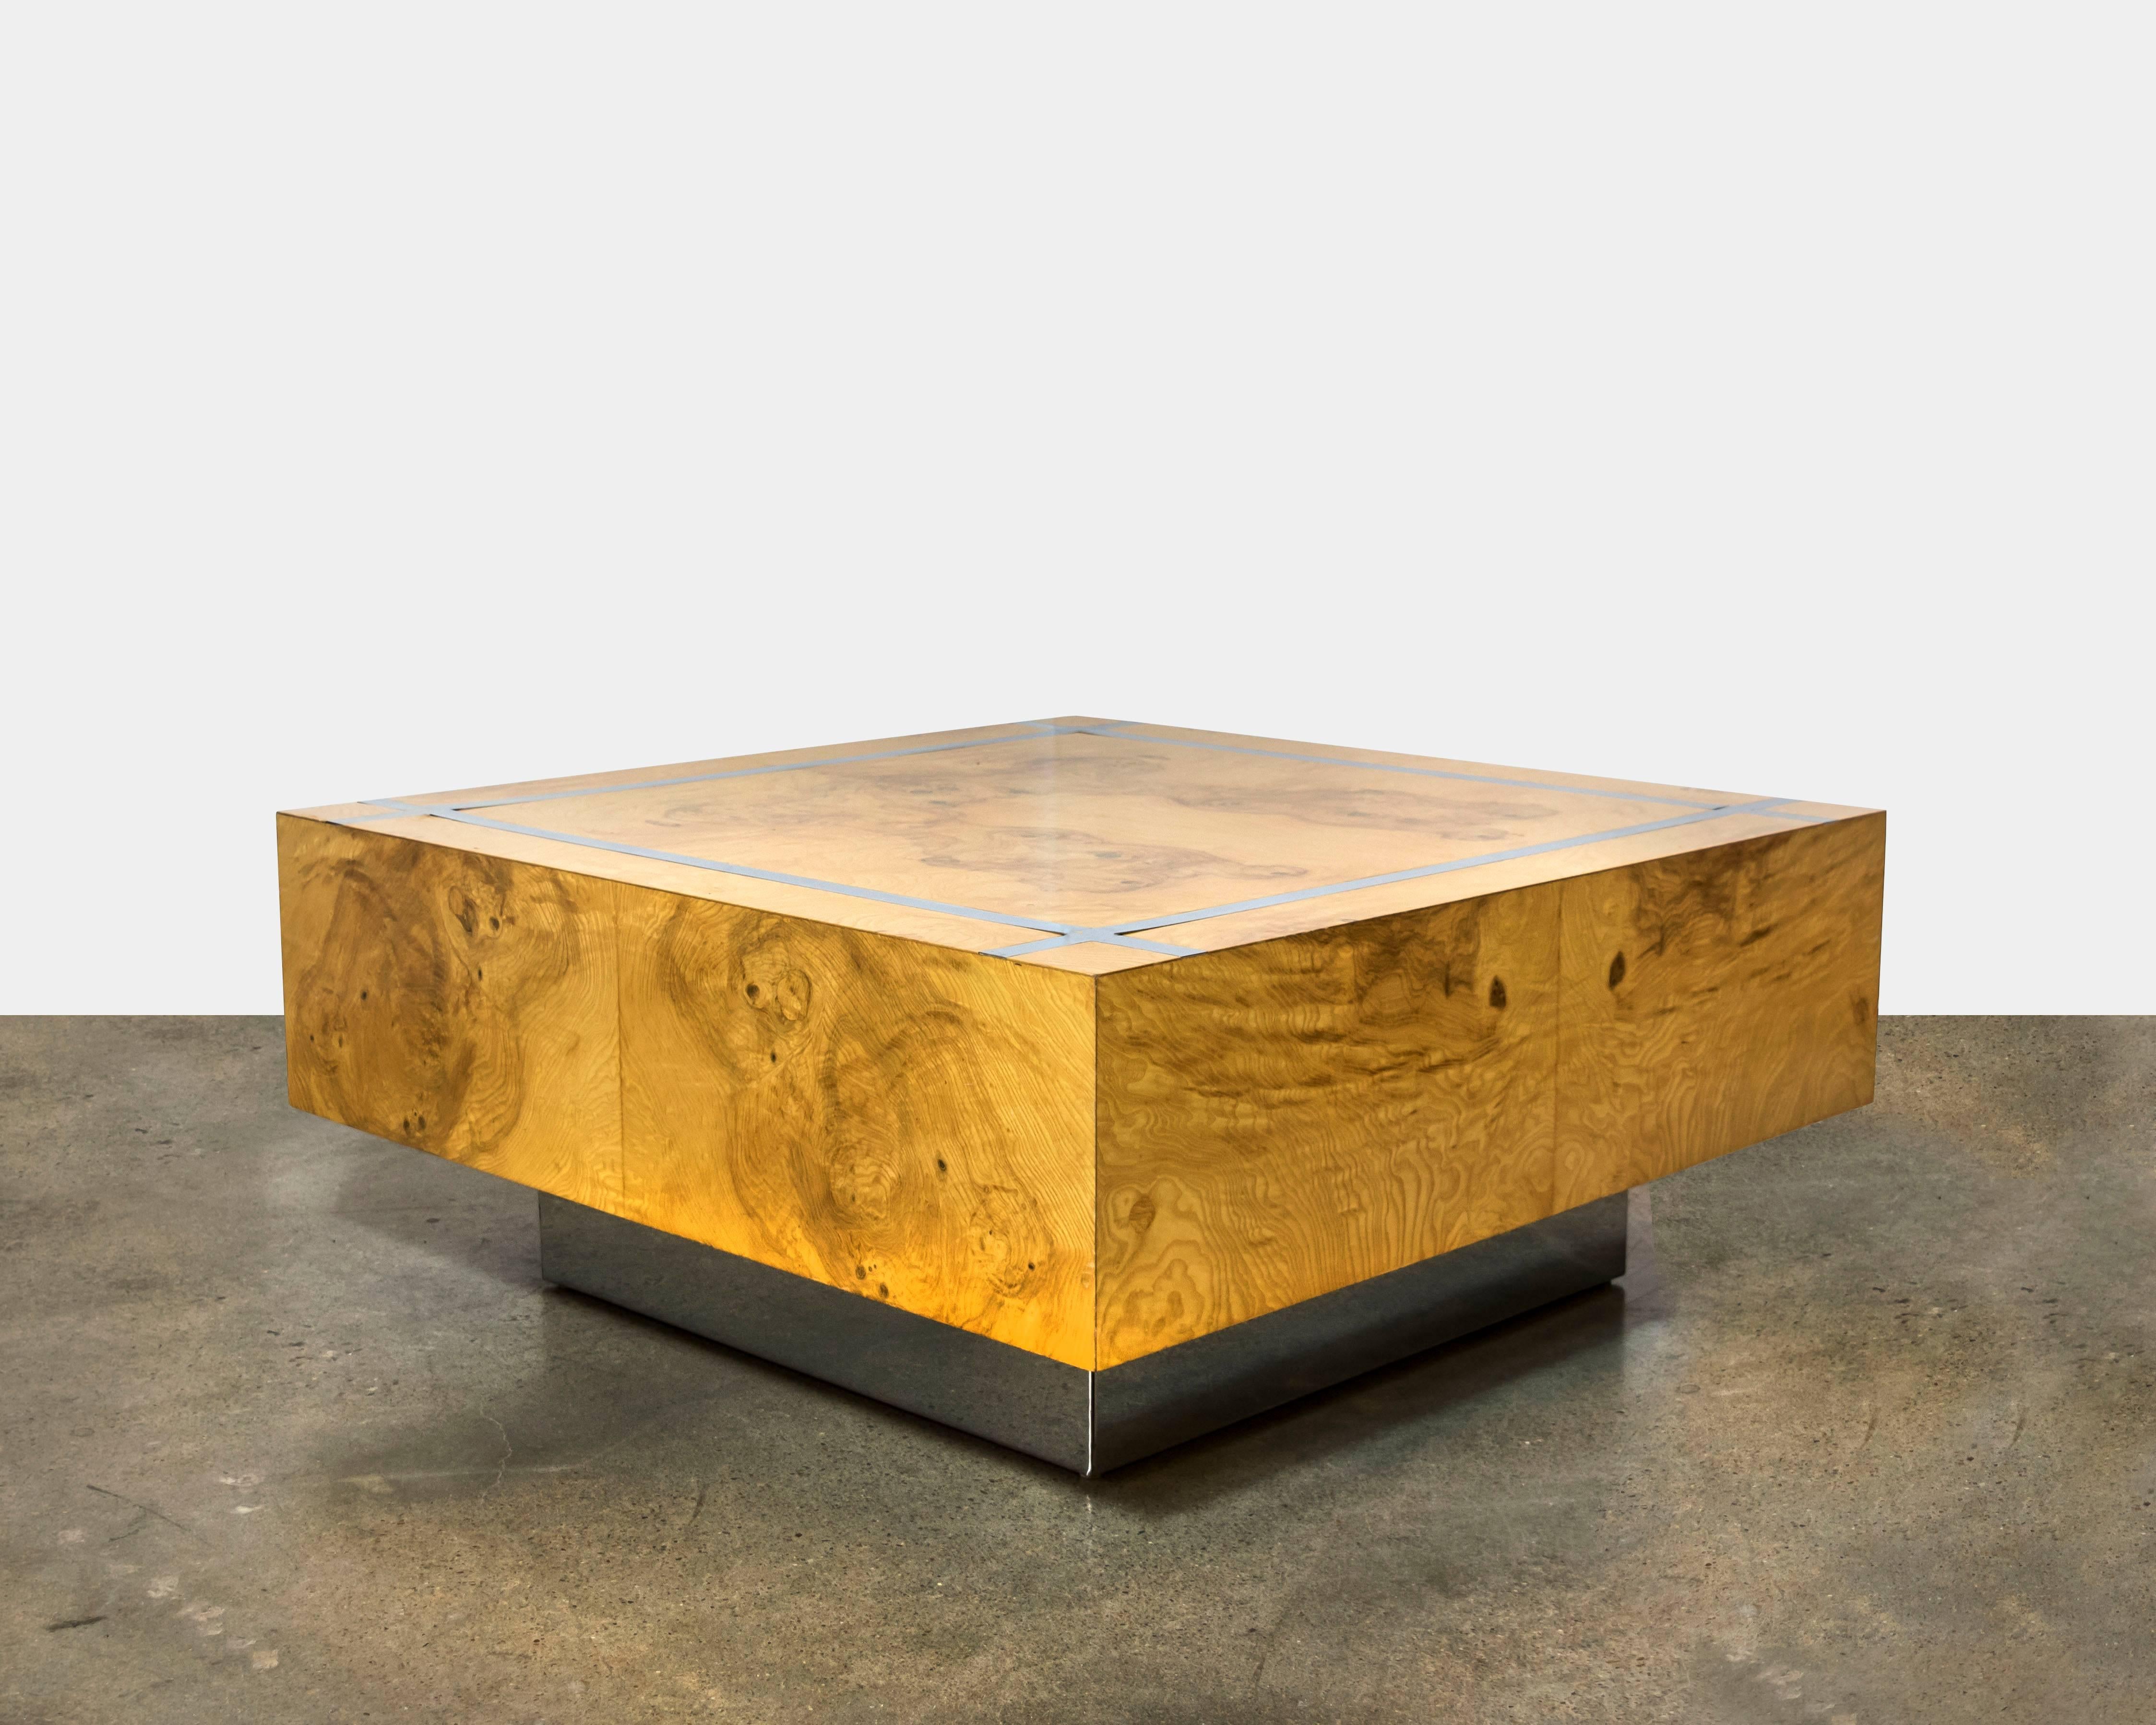 A beautiful cubed book matched burl wood coffee table with incredible graining and crisscross chrome detailing on the surface of the table as well as sitting on a polished chrome base. Solid and substantial.